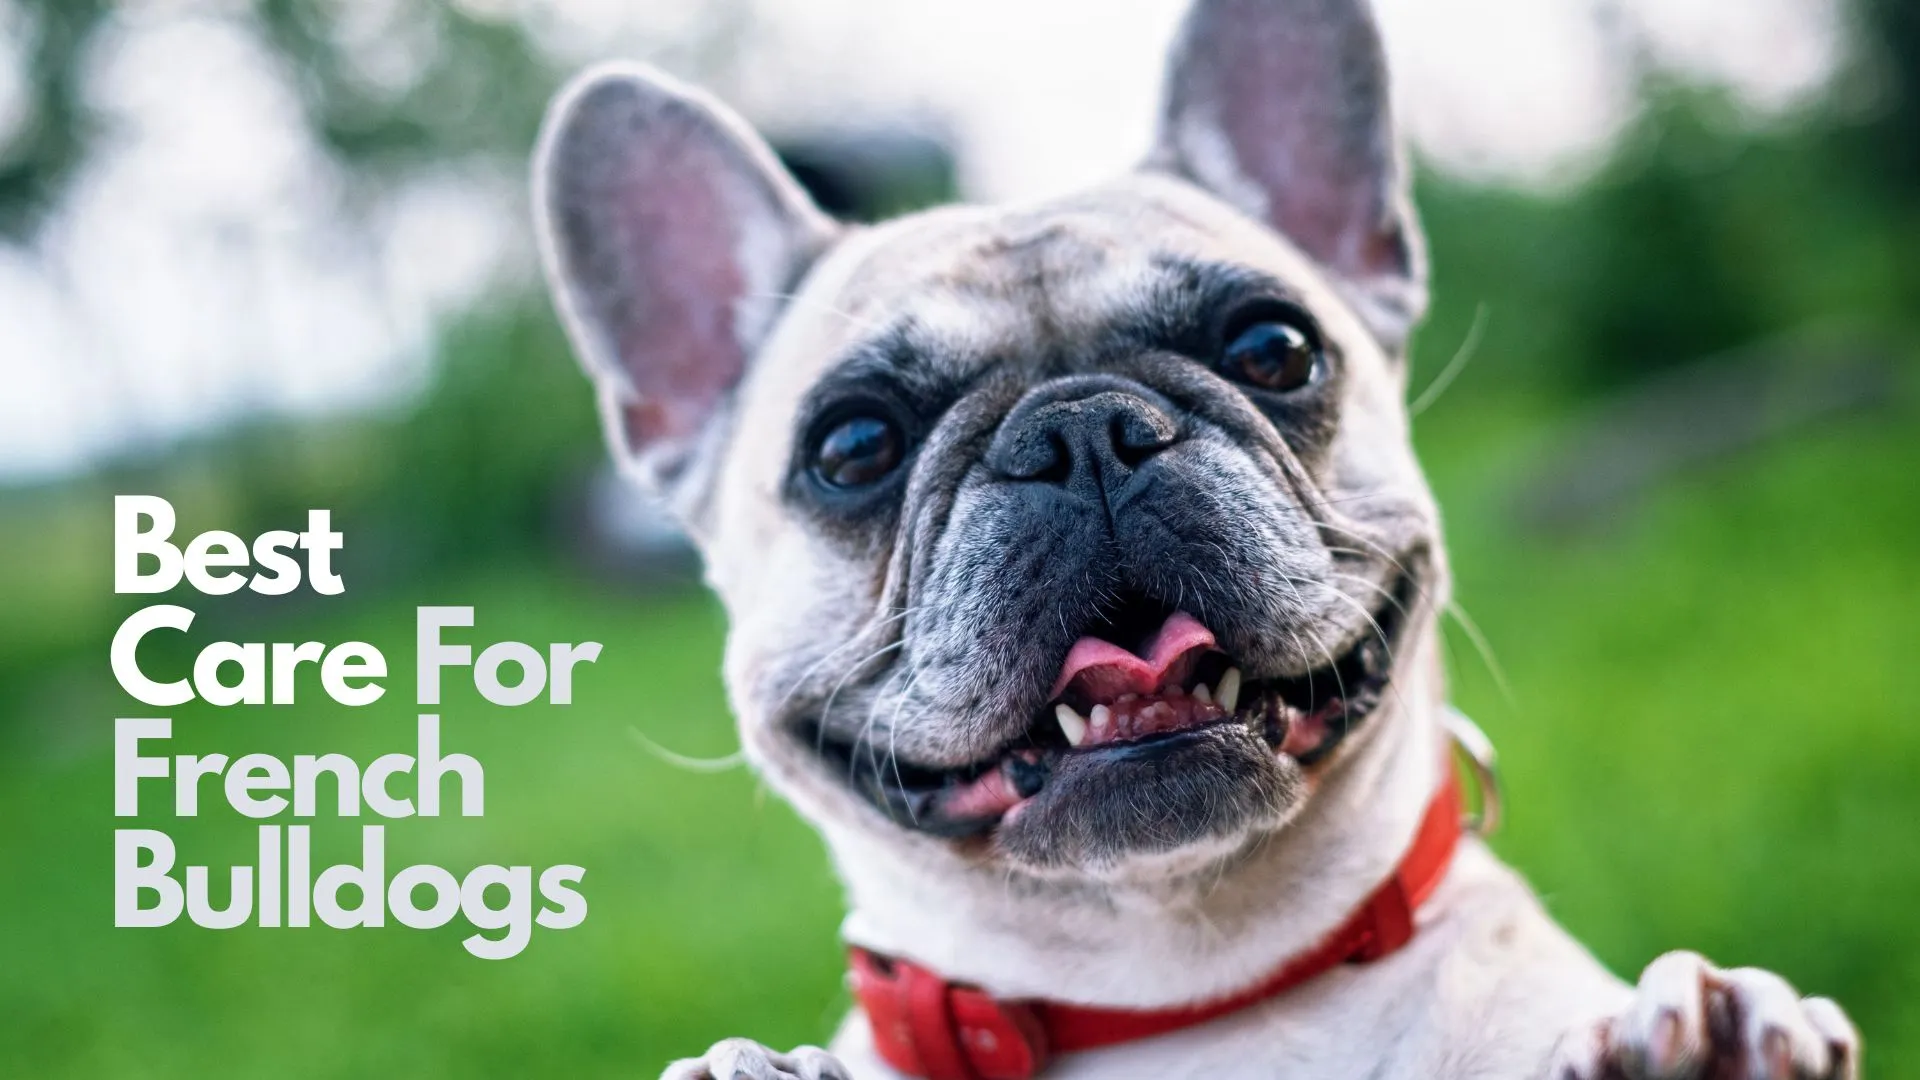 Best Care For French Bulldogs